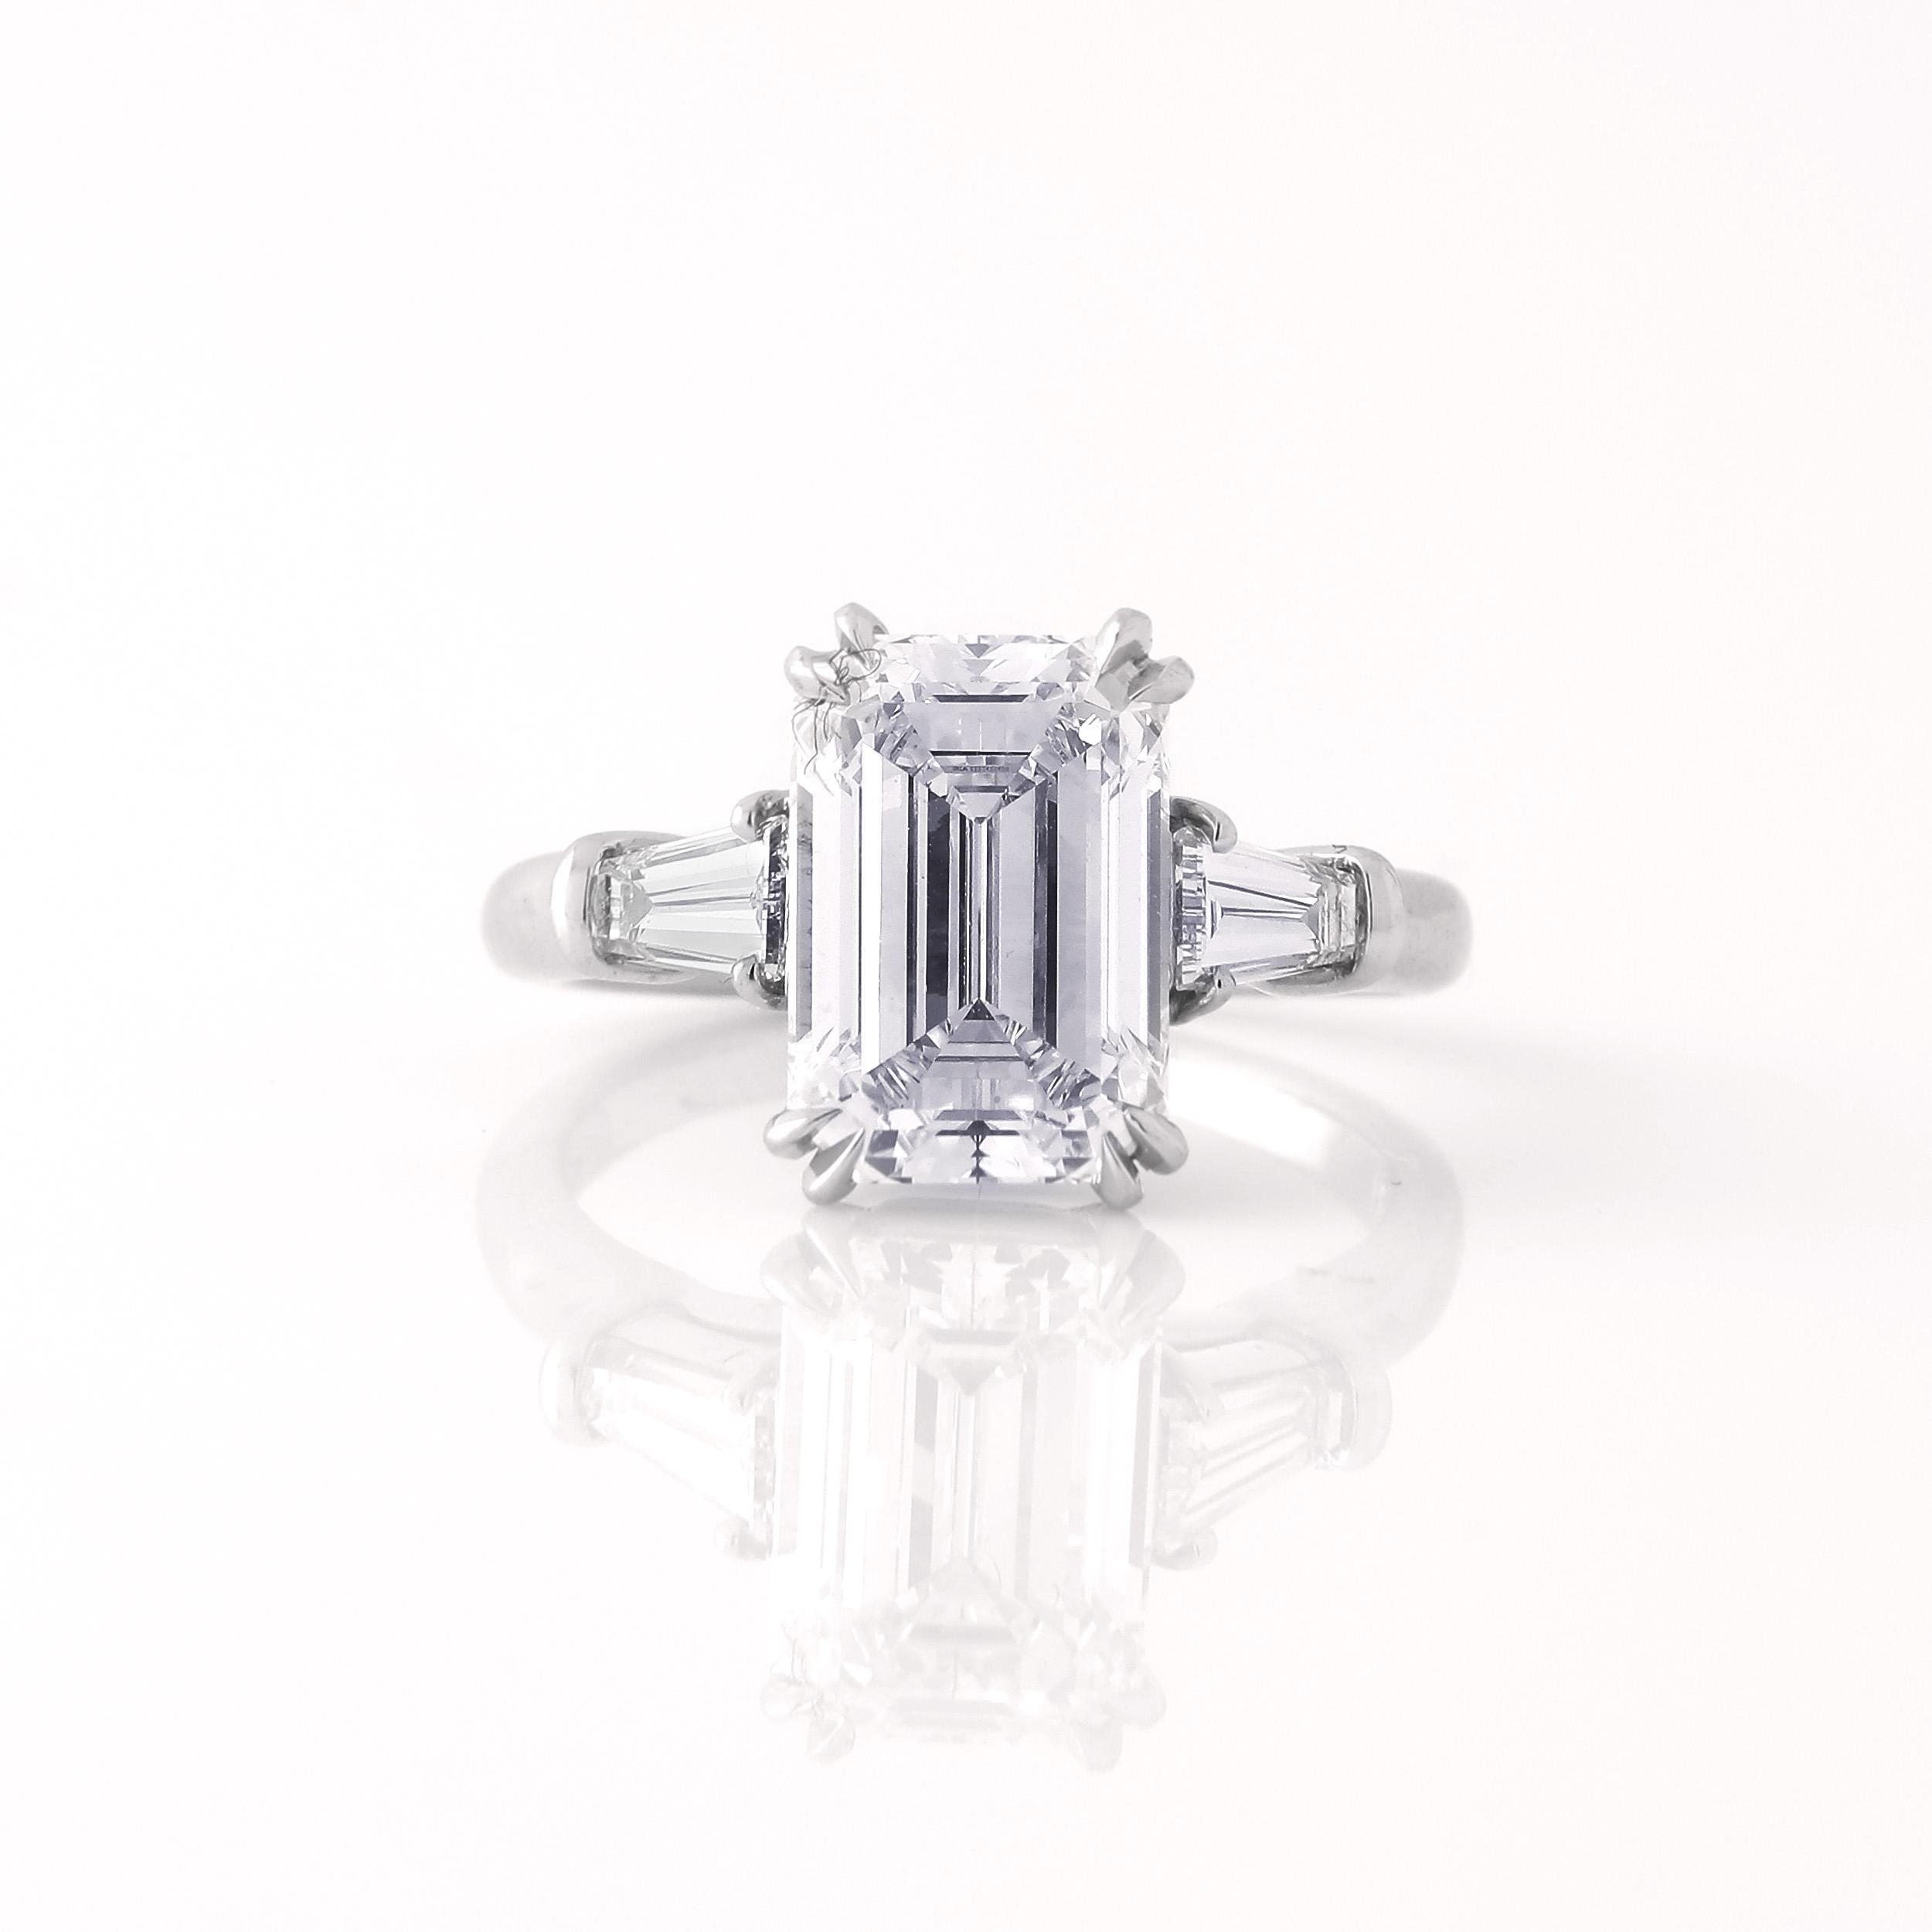 Harry Winston 3.06 ct E VVS2 Emerald Cut Three Stone Diamond Engagement ring with Tapered Baguettes weighing 0.49 cts mounted in Platinum. Emerald Cut Center Diamond is GIA Certified and measures 9.99 x 6.91 x 4.67mm. Includes original box, papers,